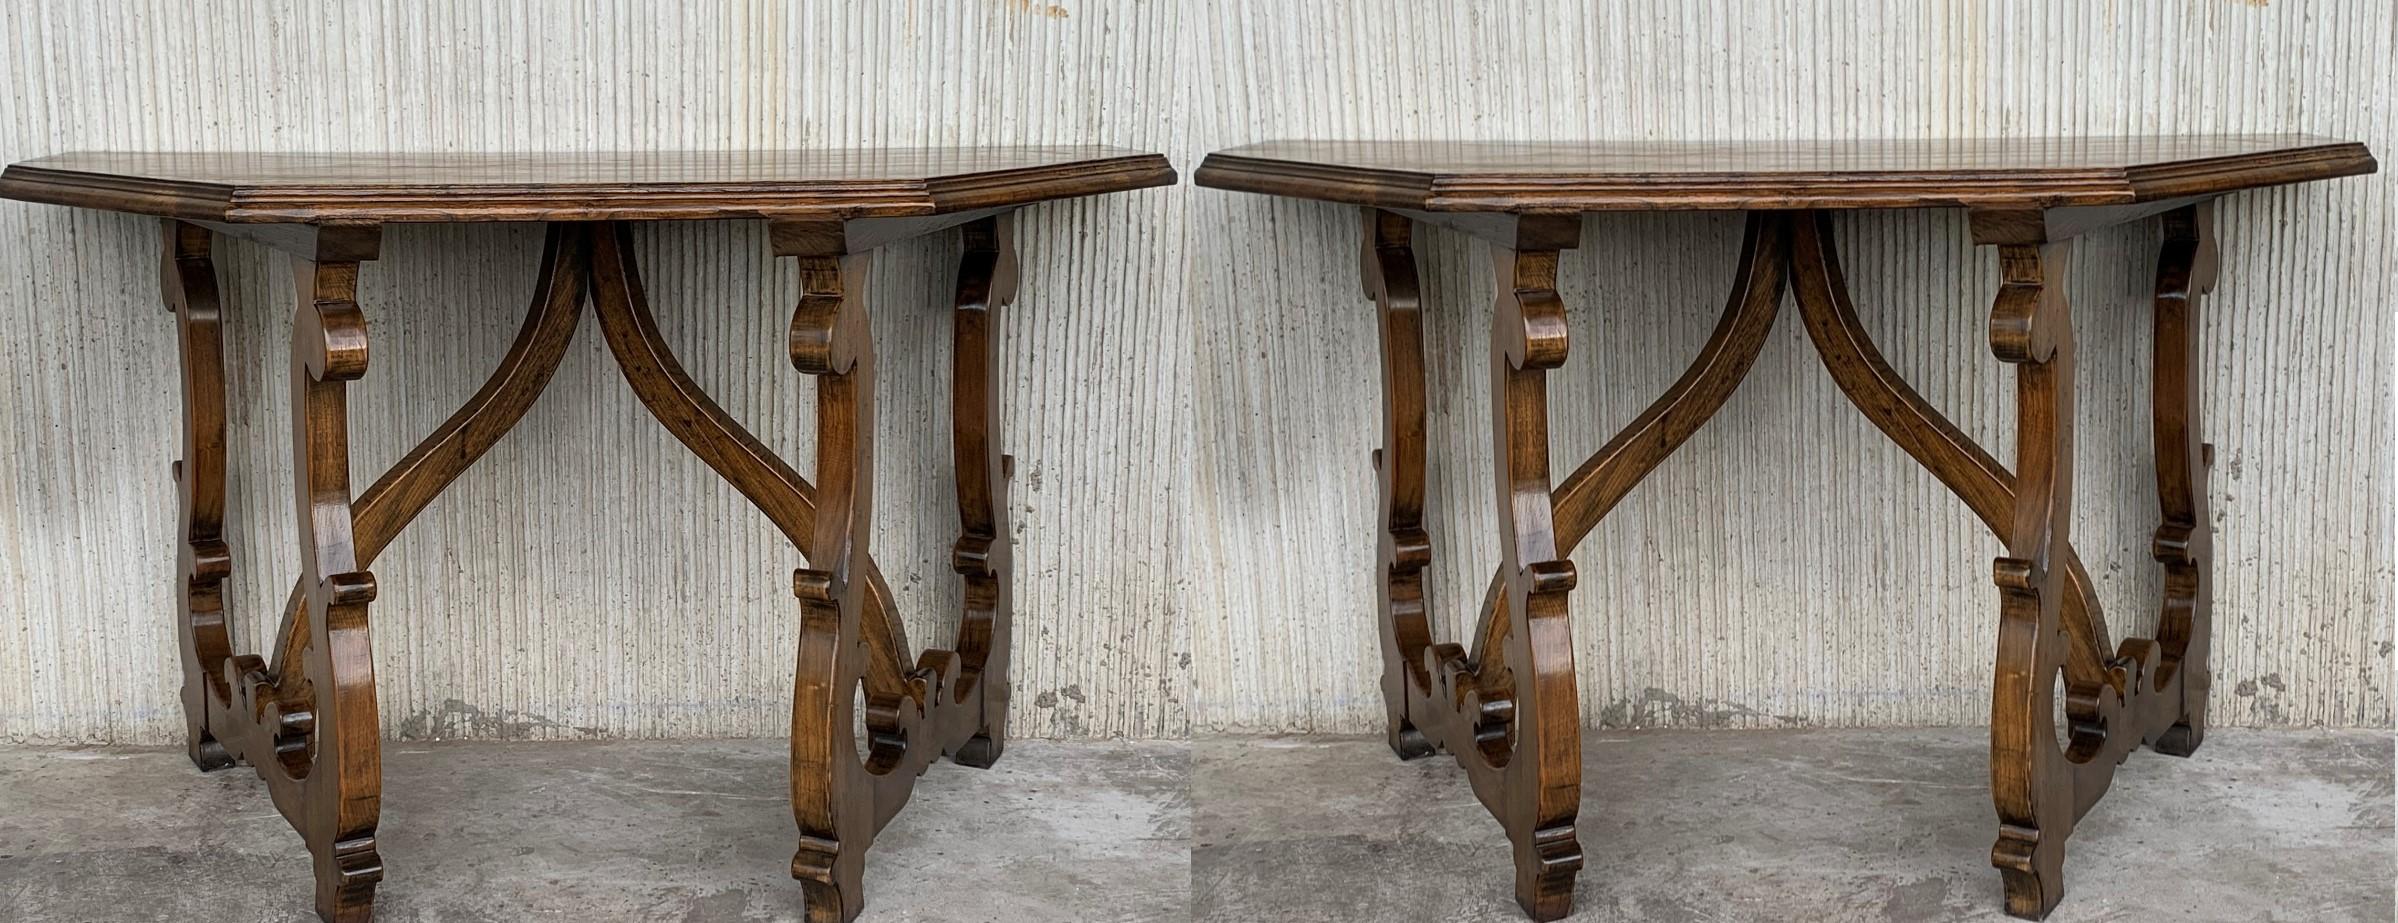 Early 20th convertible Spanish walnut dining room table with lyre legs.
Awesome pair of Spanish consoles convertibles in dining room table.
Both consoles made of solid walnut with beautiful original patina.
In two self-supporting parts, flanked